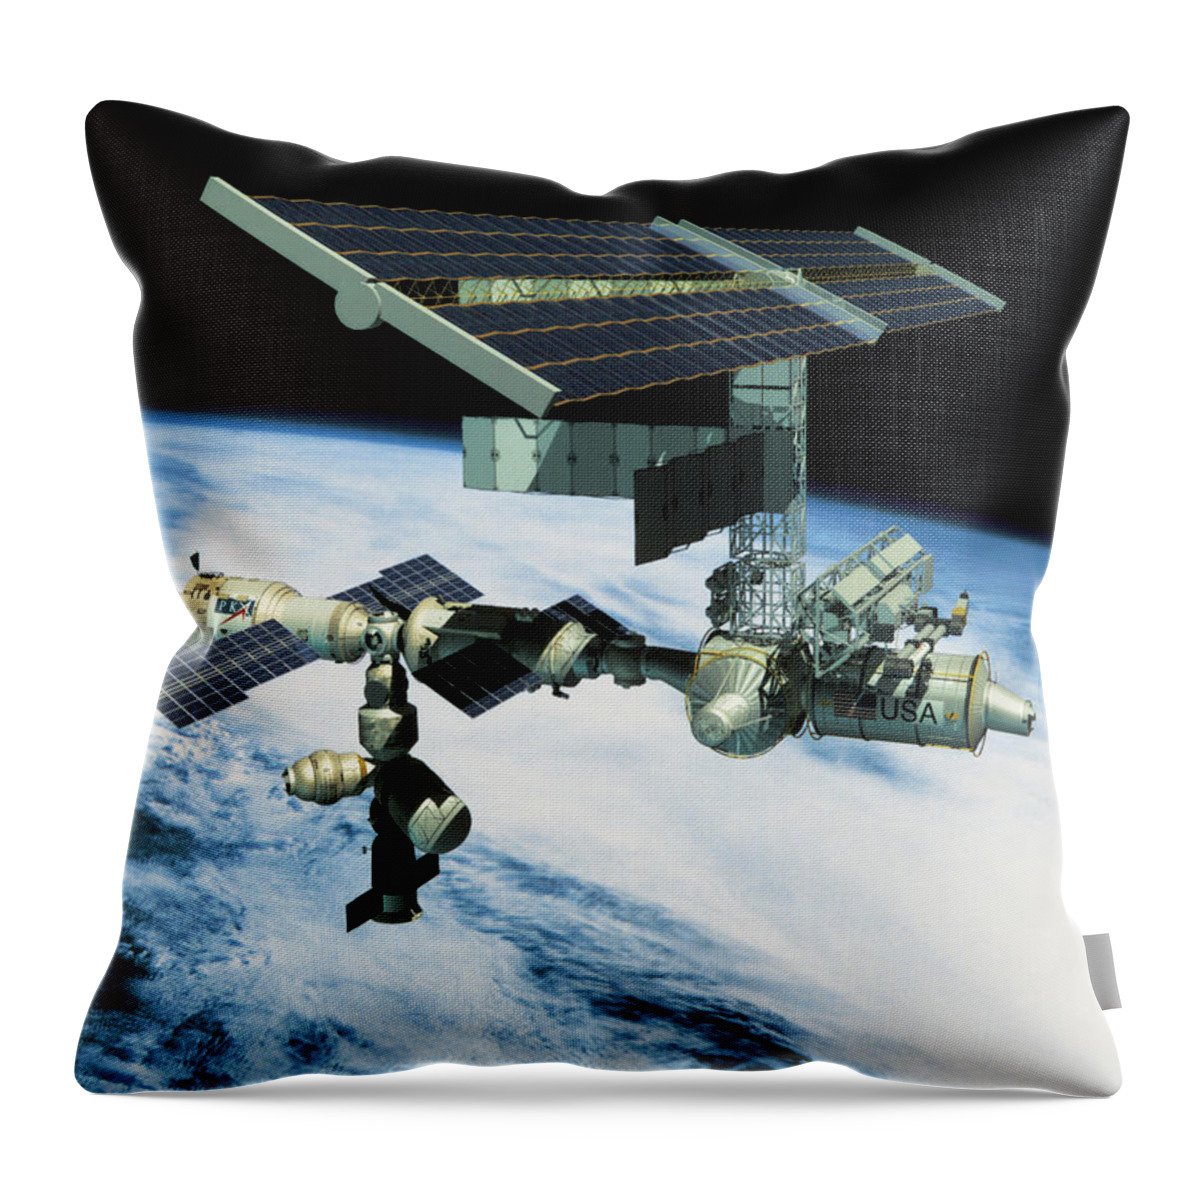 Black Color Throw Pillow featuring the photograph Space Station In Orbit by Stockbyte